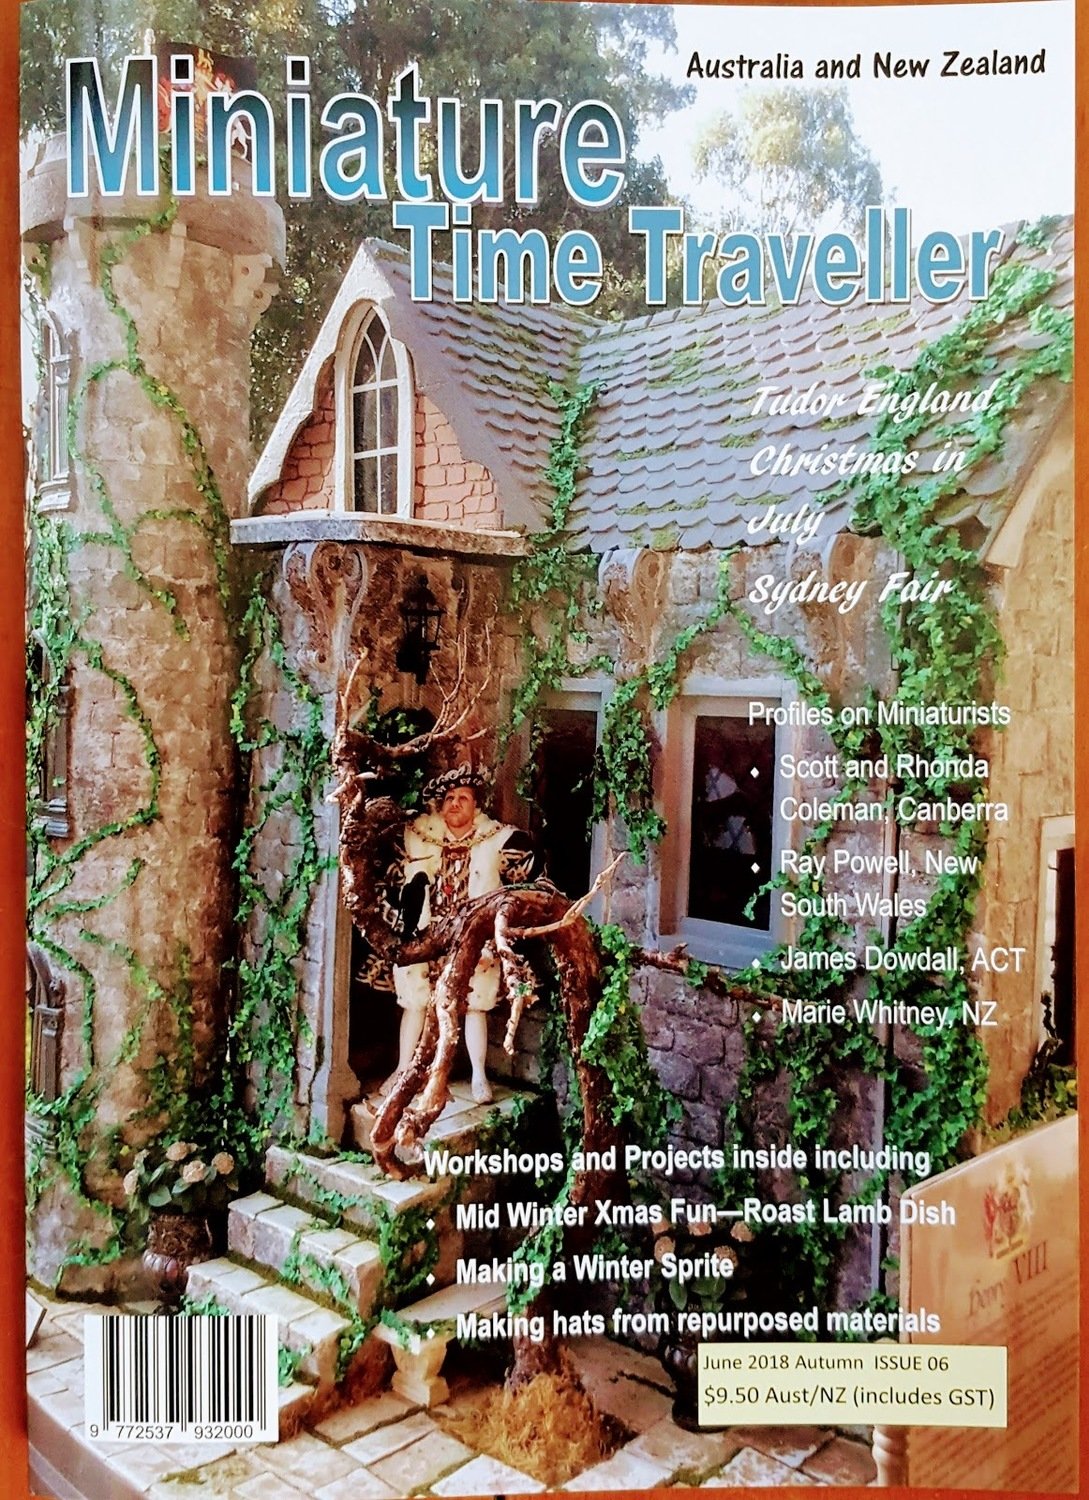 June 2018 Issue - Miniature Time Traveller Magazine - Single copy only. Postage extra